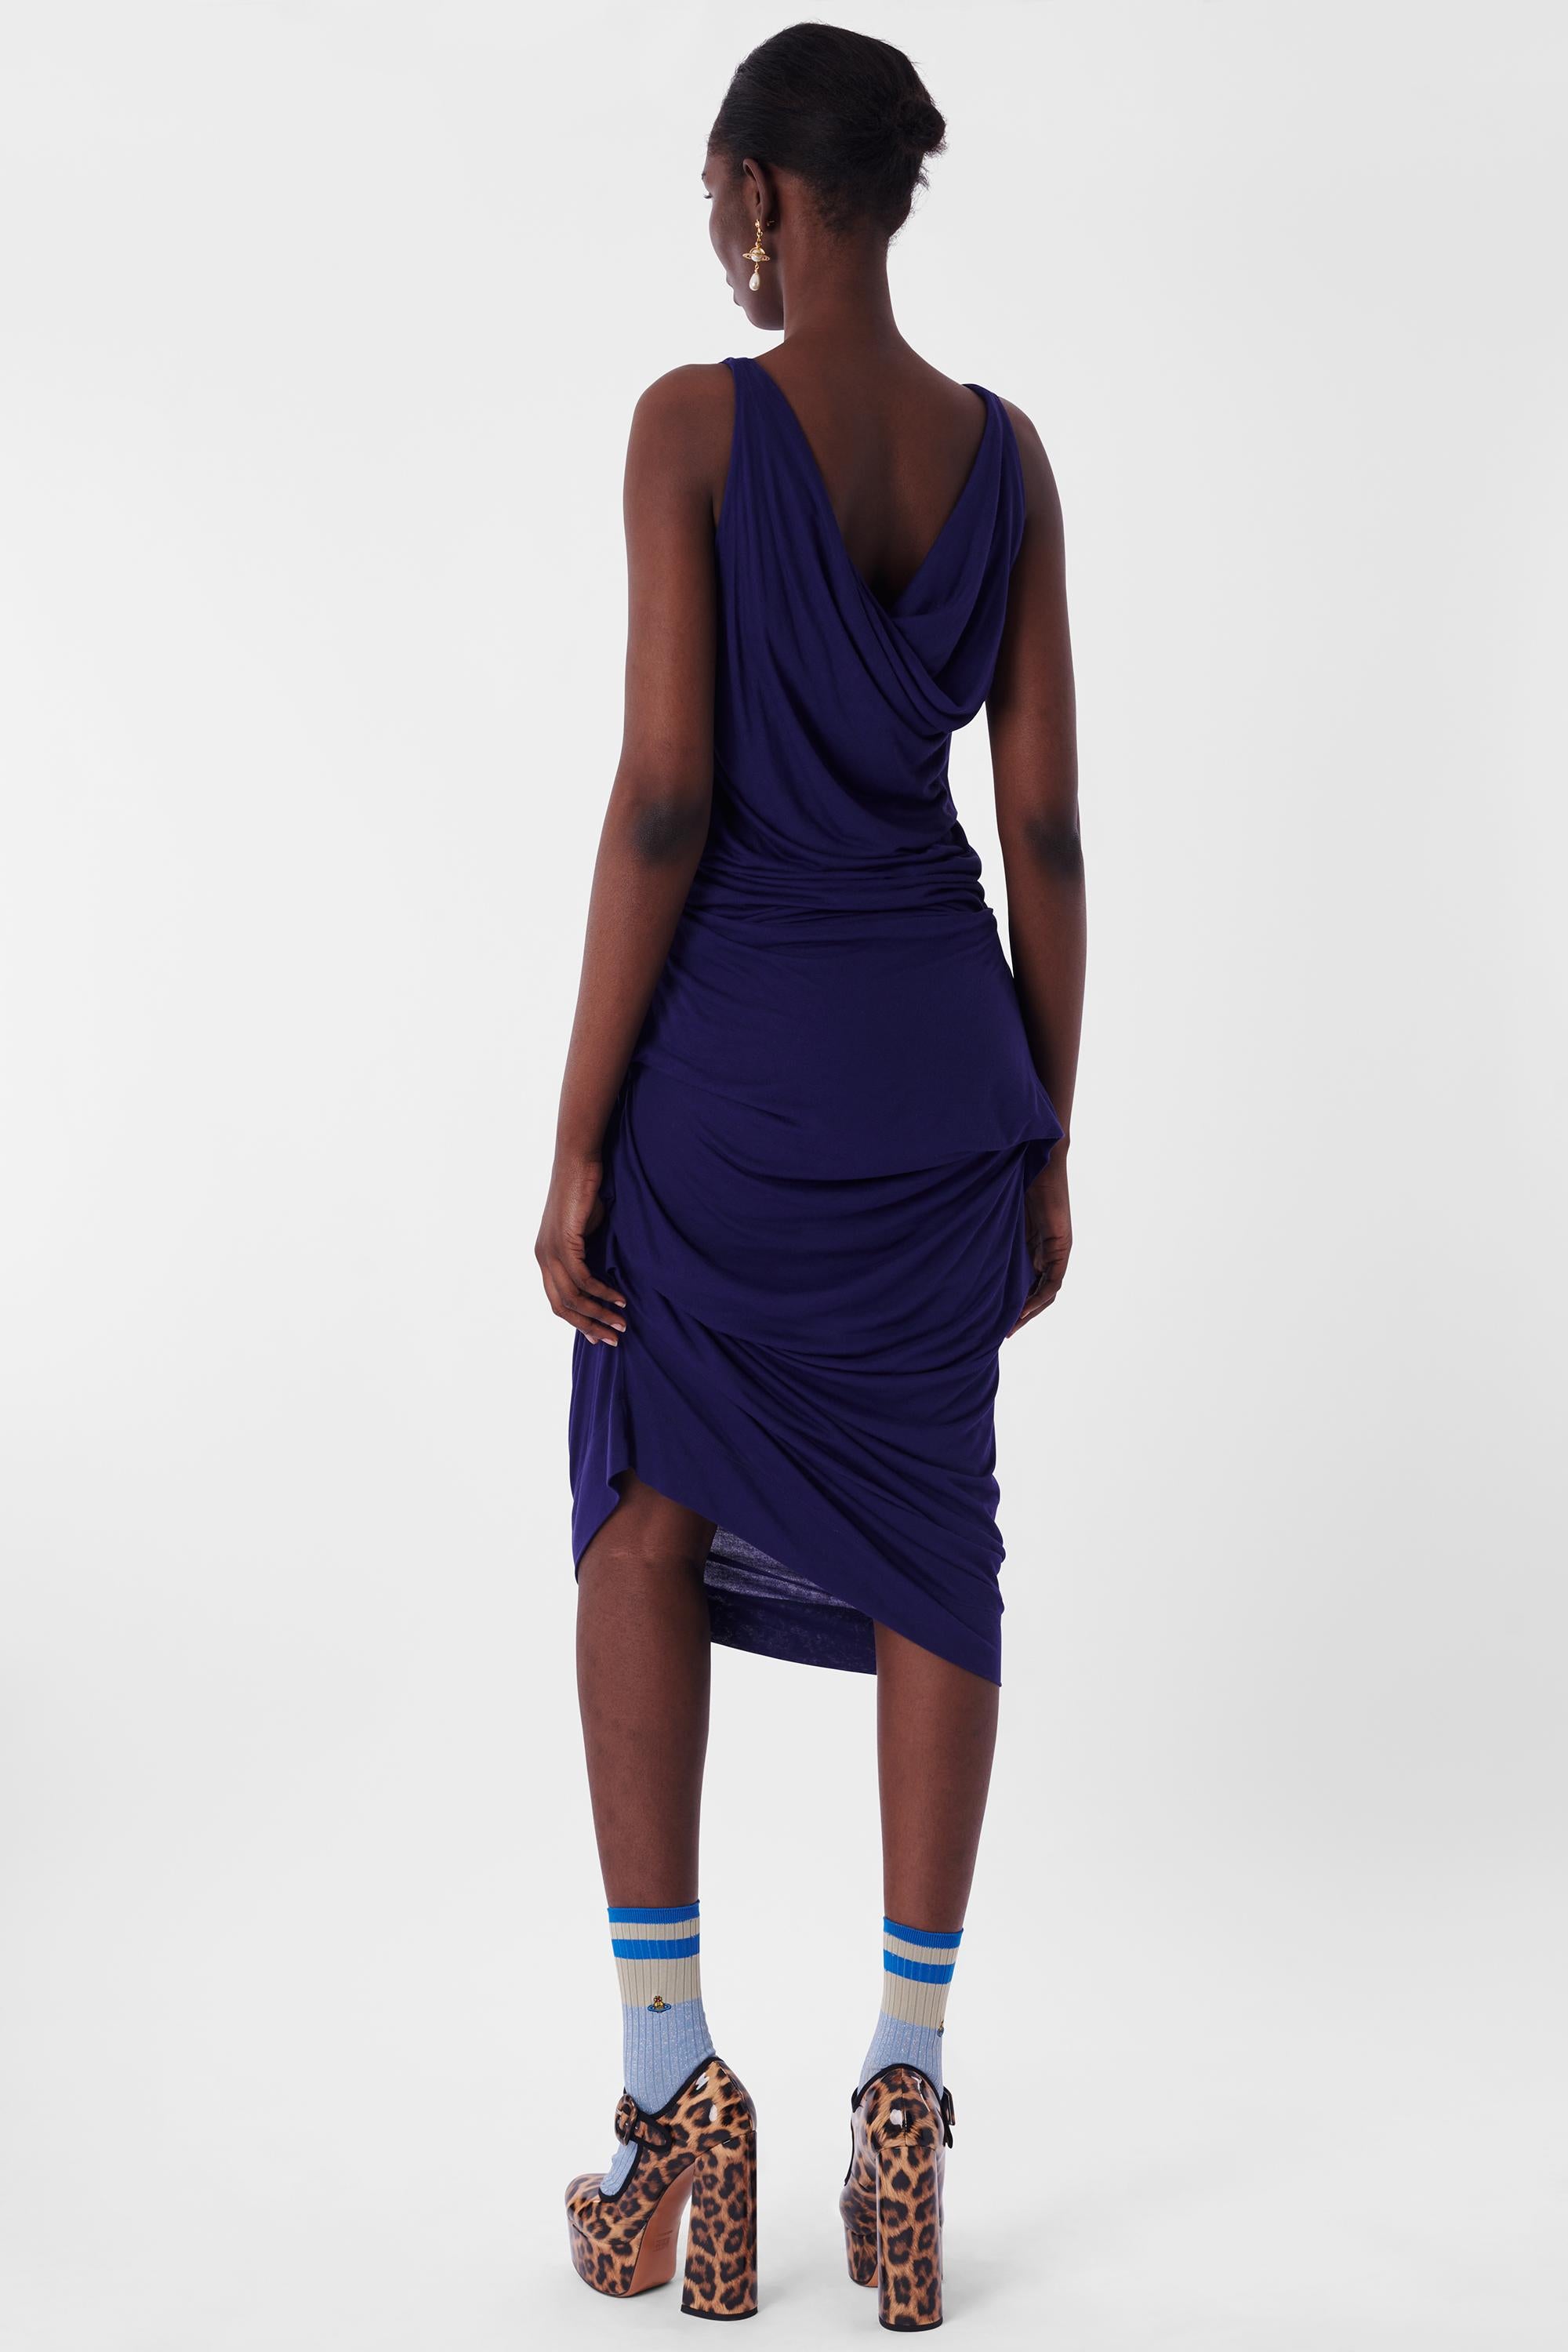 Vivienne Westwood Anglomania Blue Draped Dress. Features Draped scoop neckline and midi length.

Label size: Medium
Modern size: UK: 10, US: 4 - 6, EU: 38
Measurements when laid flat: length: 48 inches, bust: 18 inches, waist: 16.5 inches